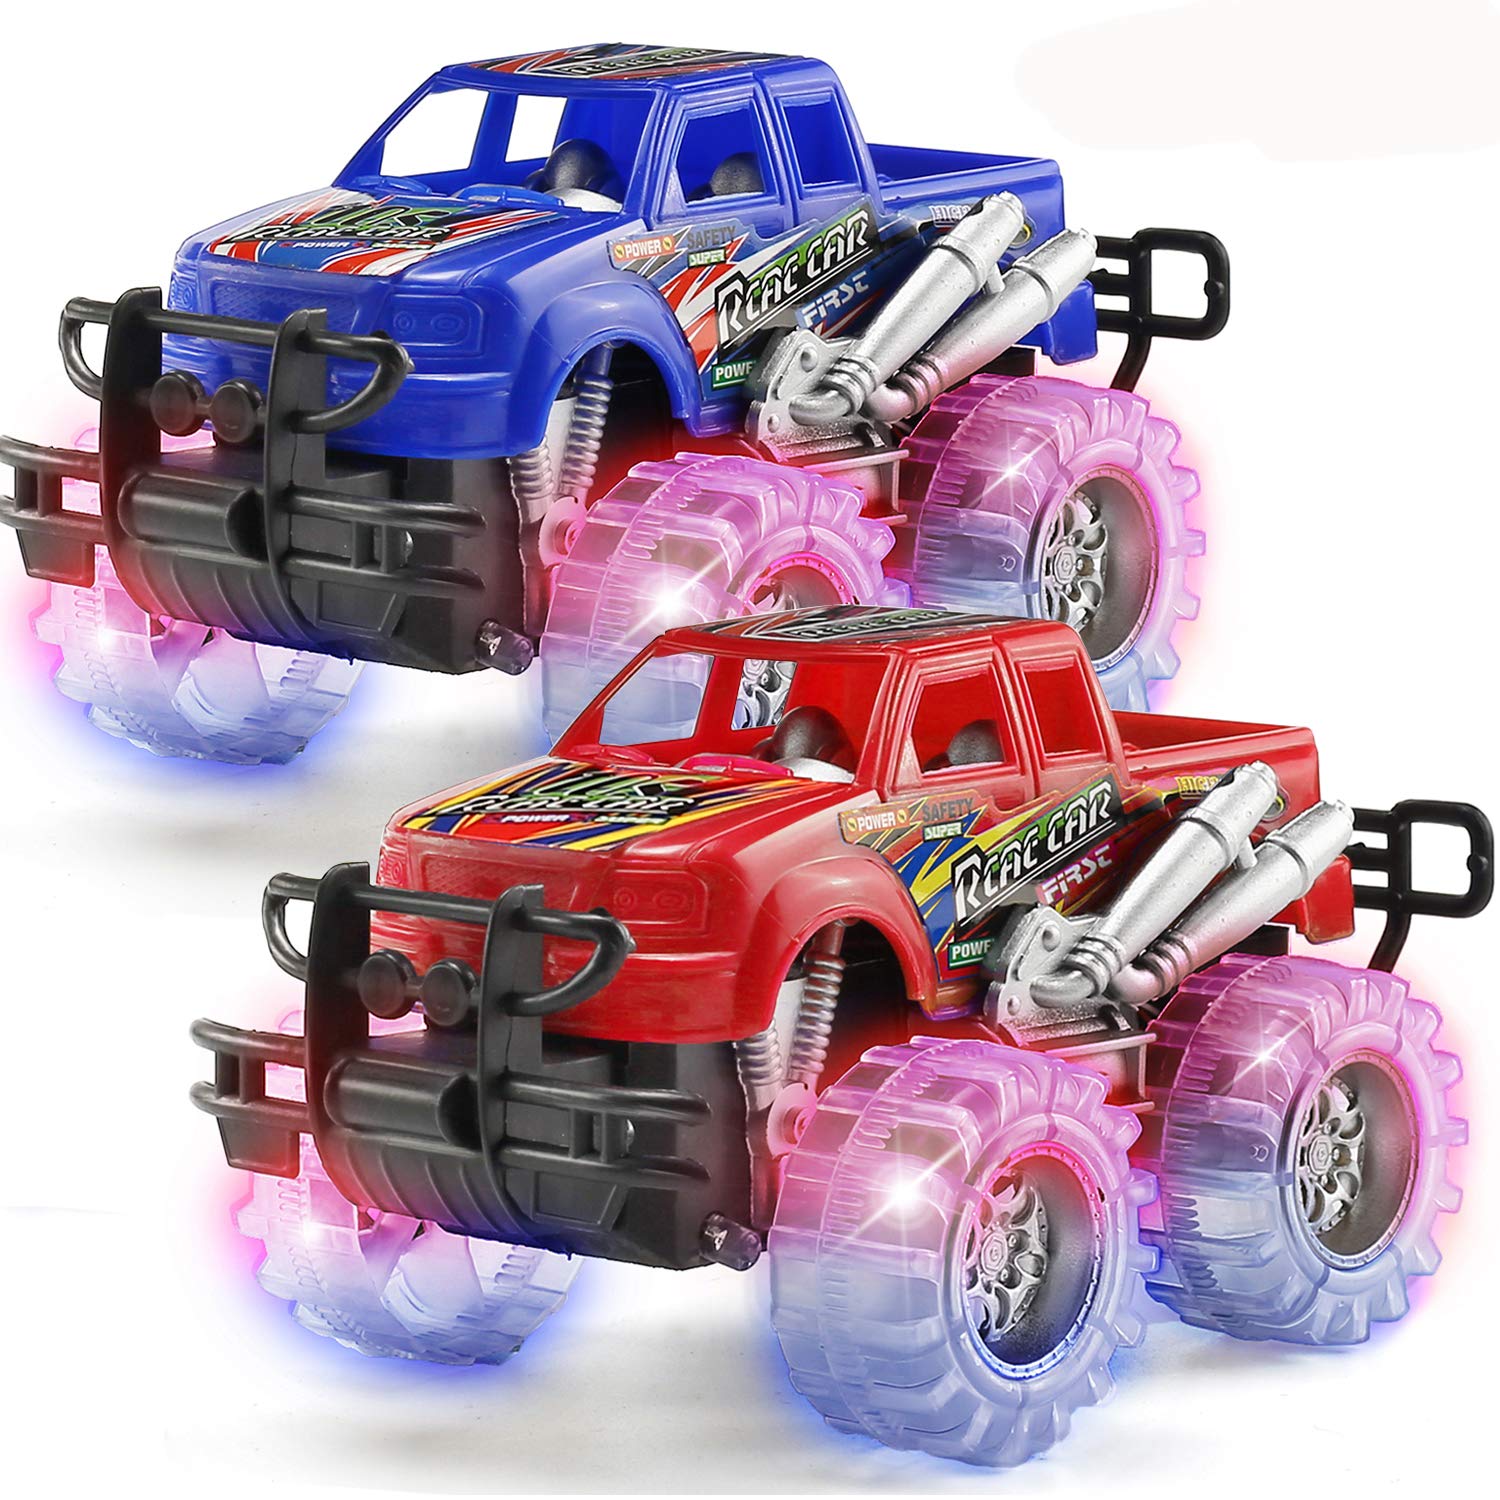 Byonebye 2 Pack Light Up Monster Truck car Toy with Beautiful Flashing LED Tires, Best Birthday gift for Boy girl Ages 3+, Push n go cars